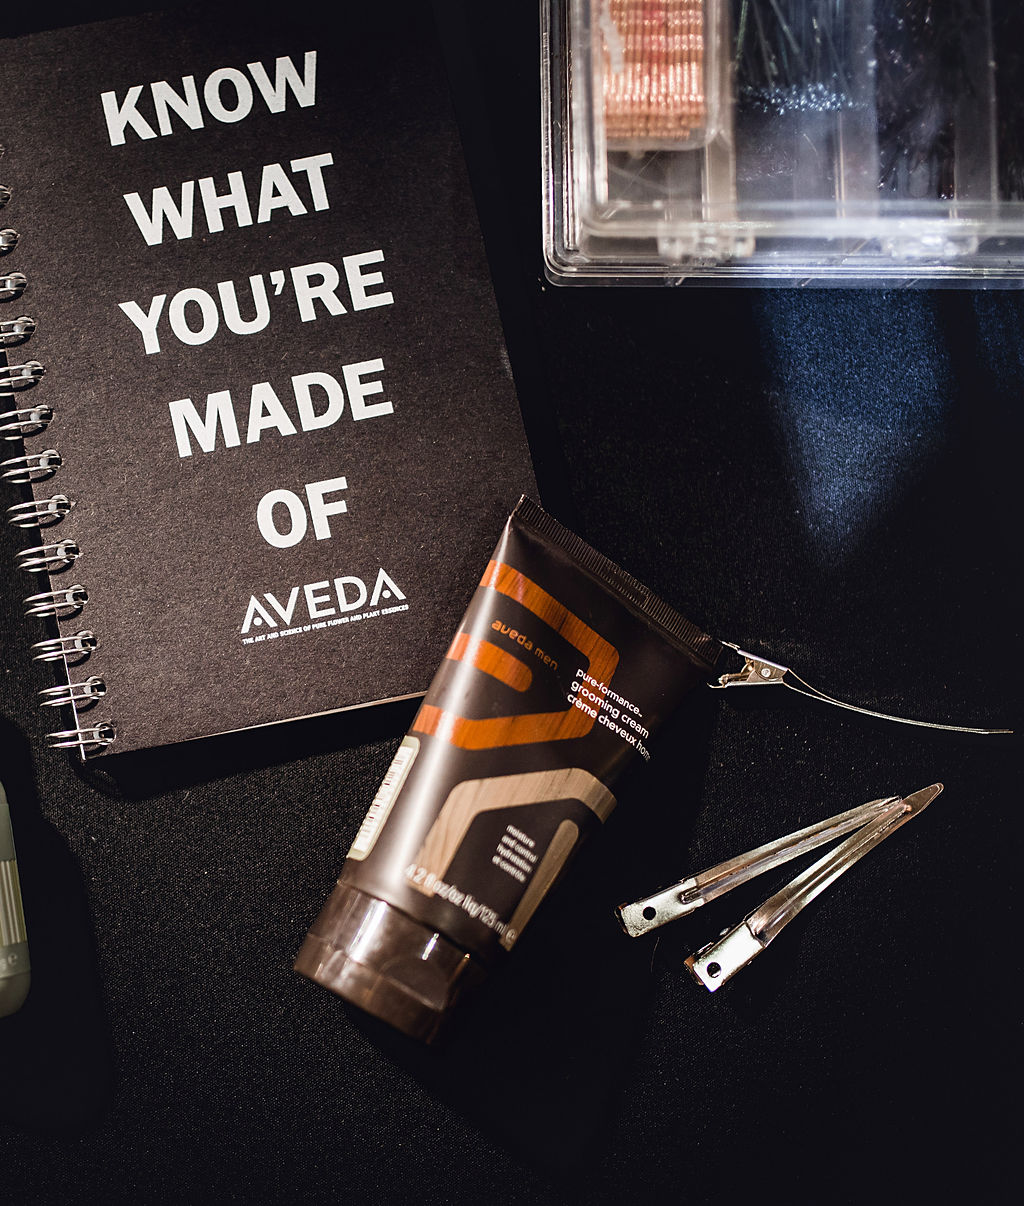 Contact us at Aveda Institute Maryland know what you're made of